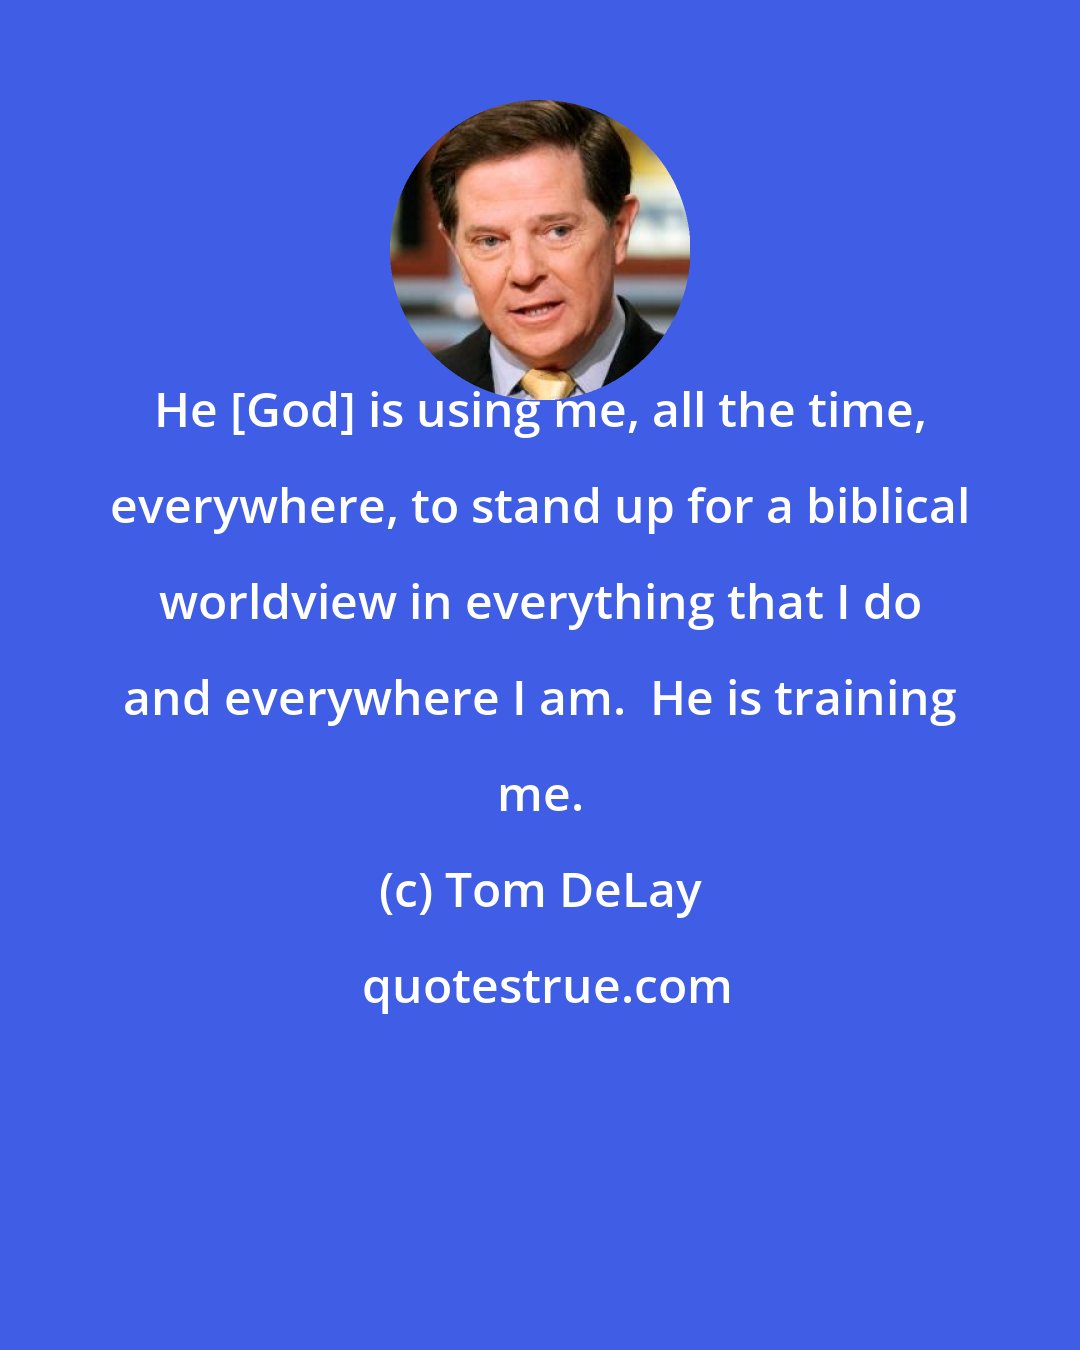 Tom DeLay: He [God] is using me, all the time, everywhere, to stand up for a biblical worldview in everything that I do and everywhere I am.  He is training me.